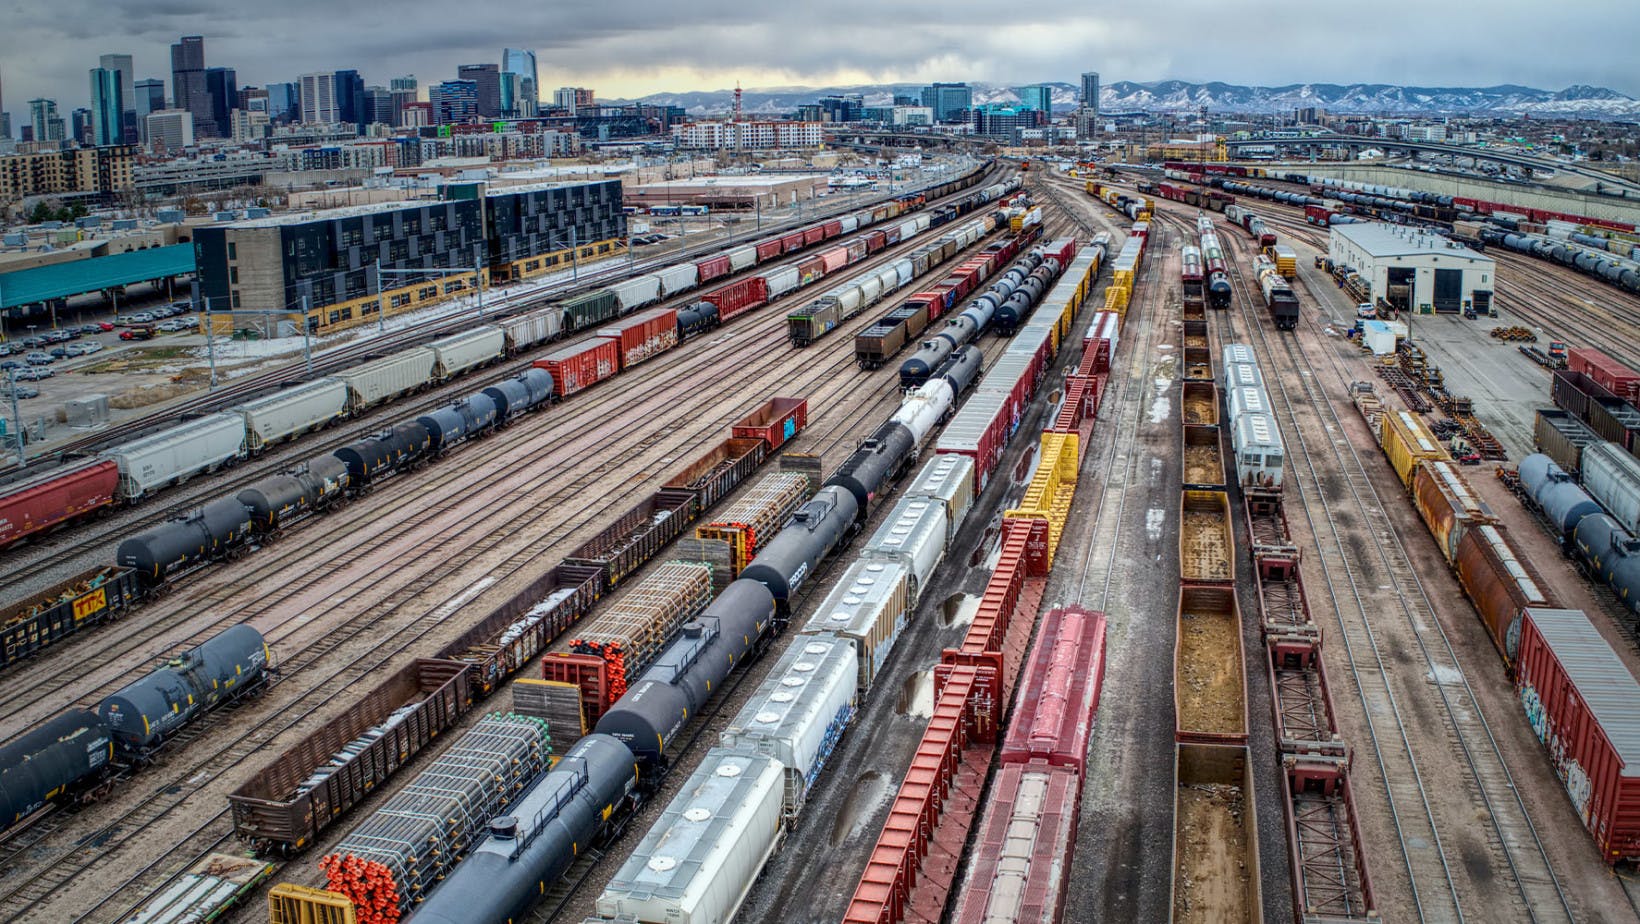 Multiple train tracks storing crates and containers of products and goods